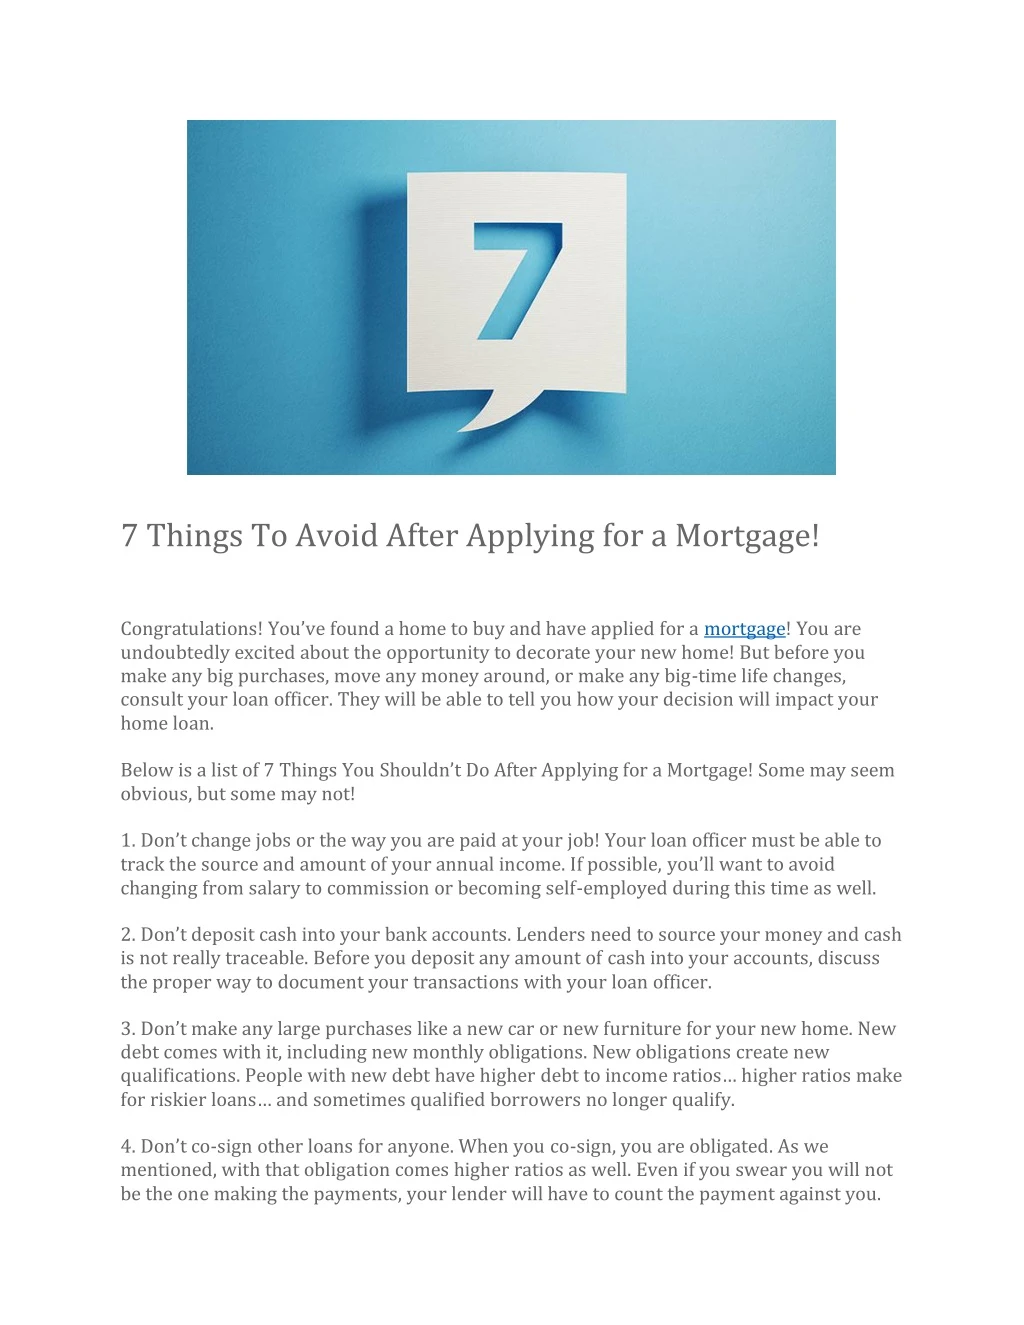 7 things to avoid after applying for a mortgage